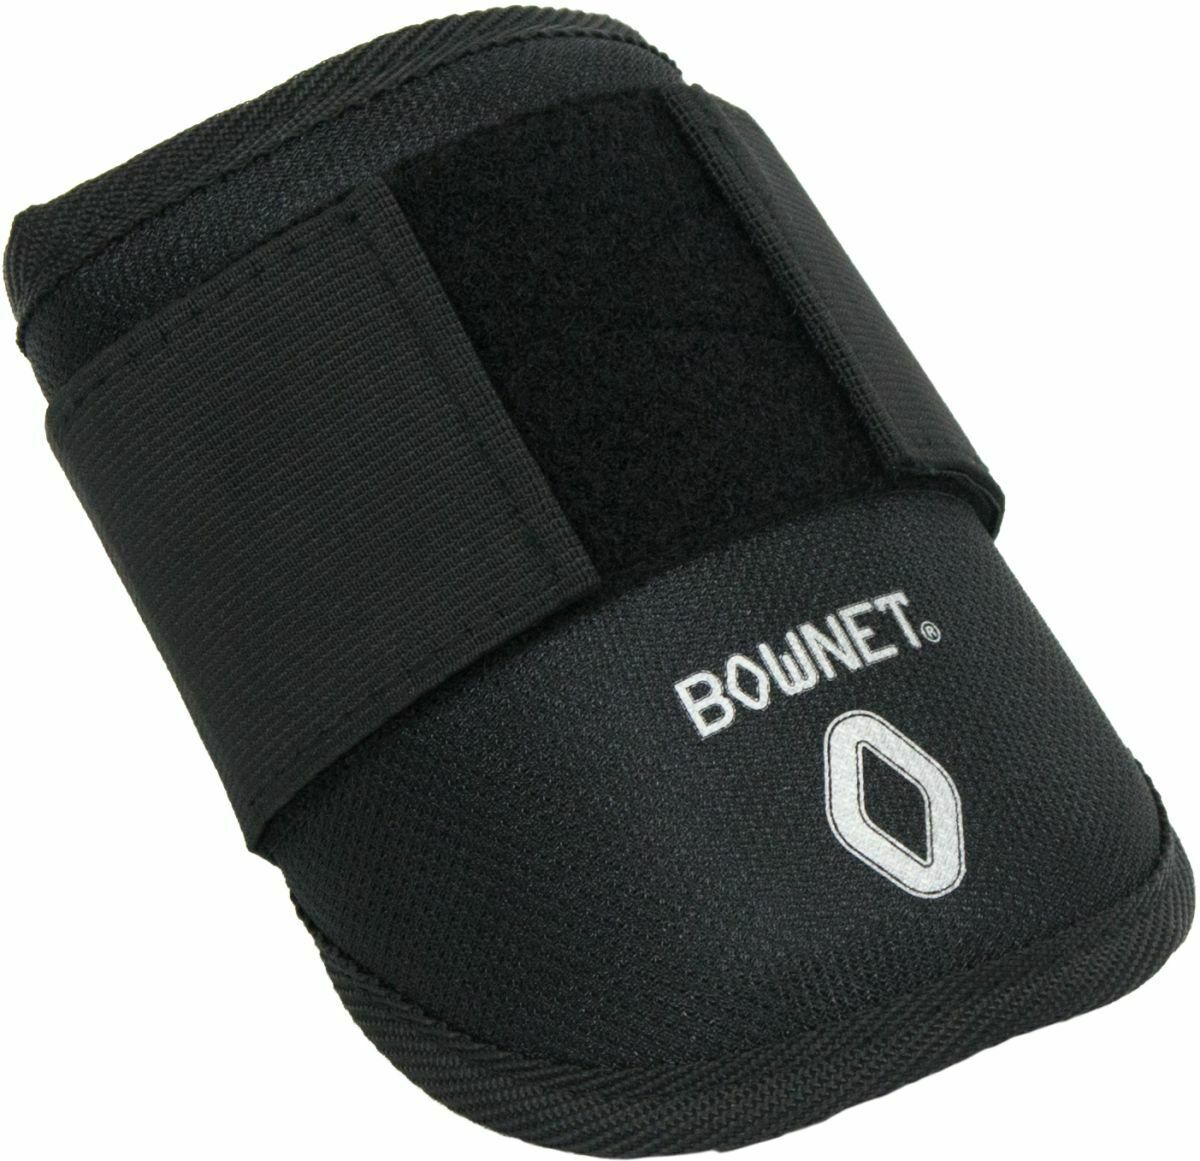 Bownet Adult Elbow Guard